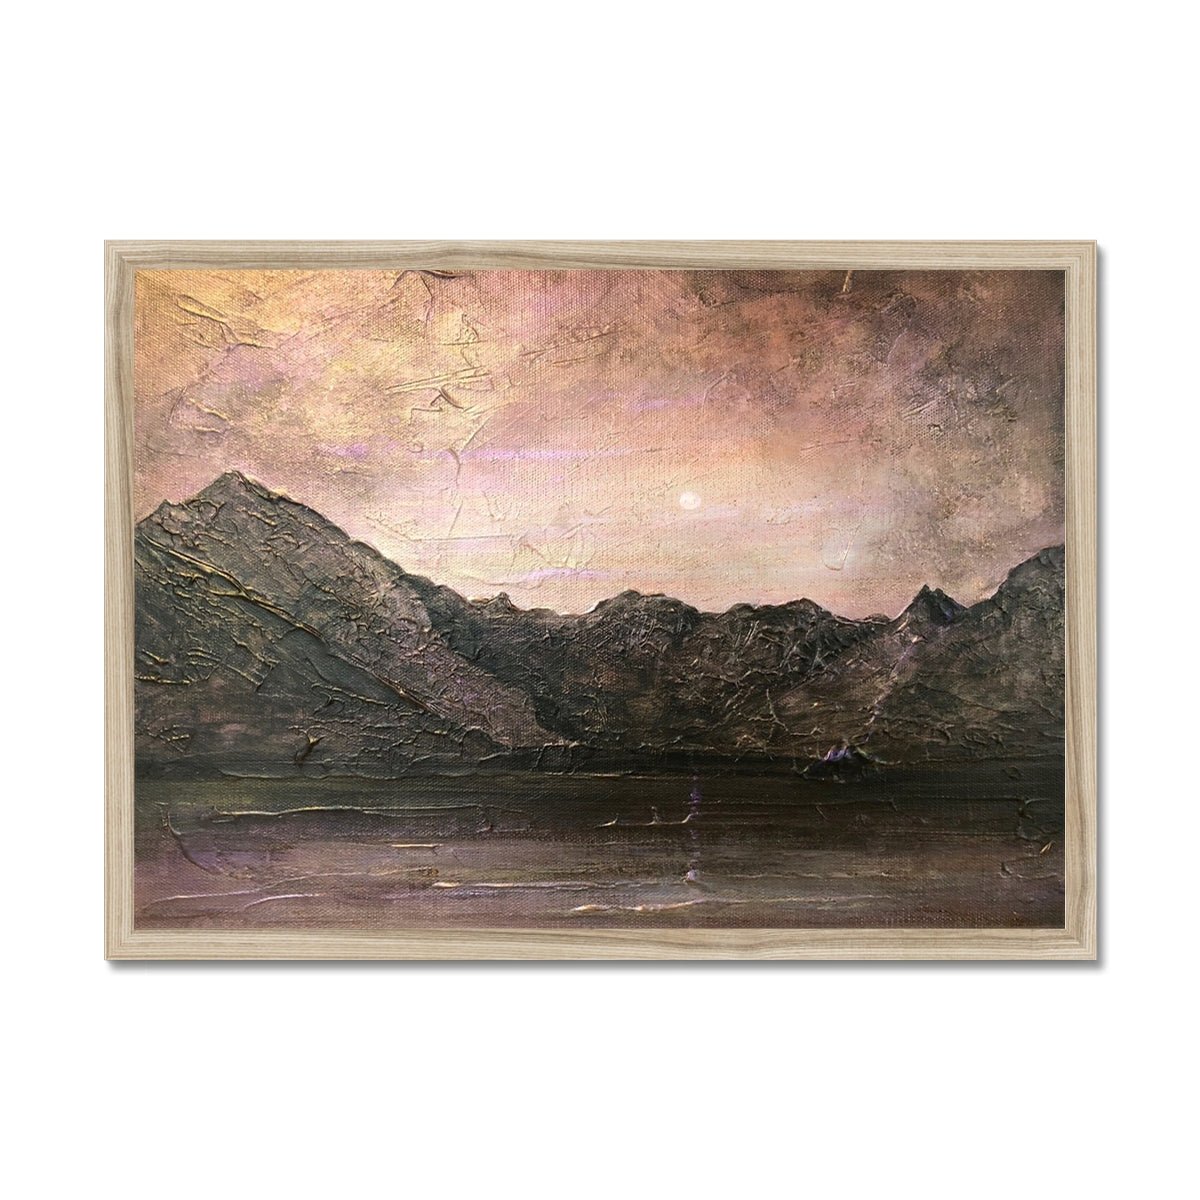 Dubh Ridge Moonlight Skye Painting | Framed Prints From Scotland-Framed Prints-Skye Art Gallery-A2 Landscape-Natural Frame-Paintings, Prints, Homeware, Art Gifts From Scotland By Scottish Artist Kevin Hunter